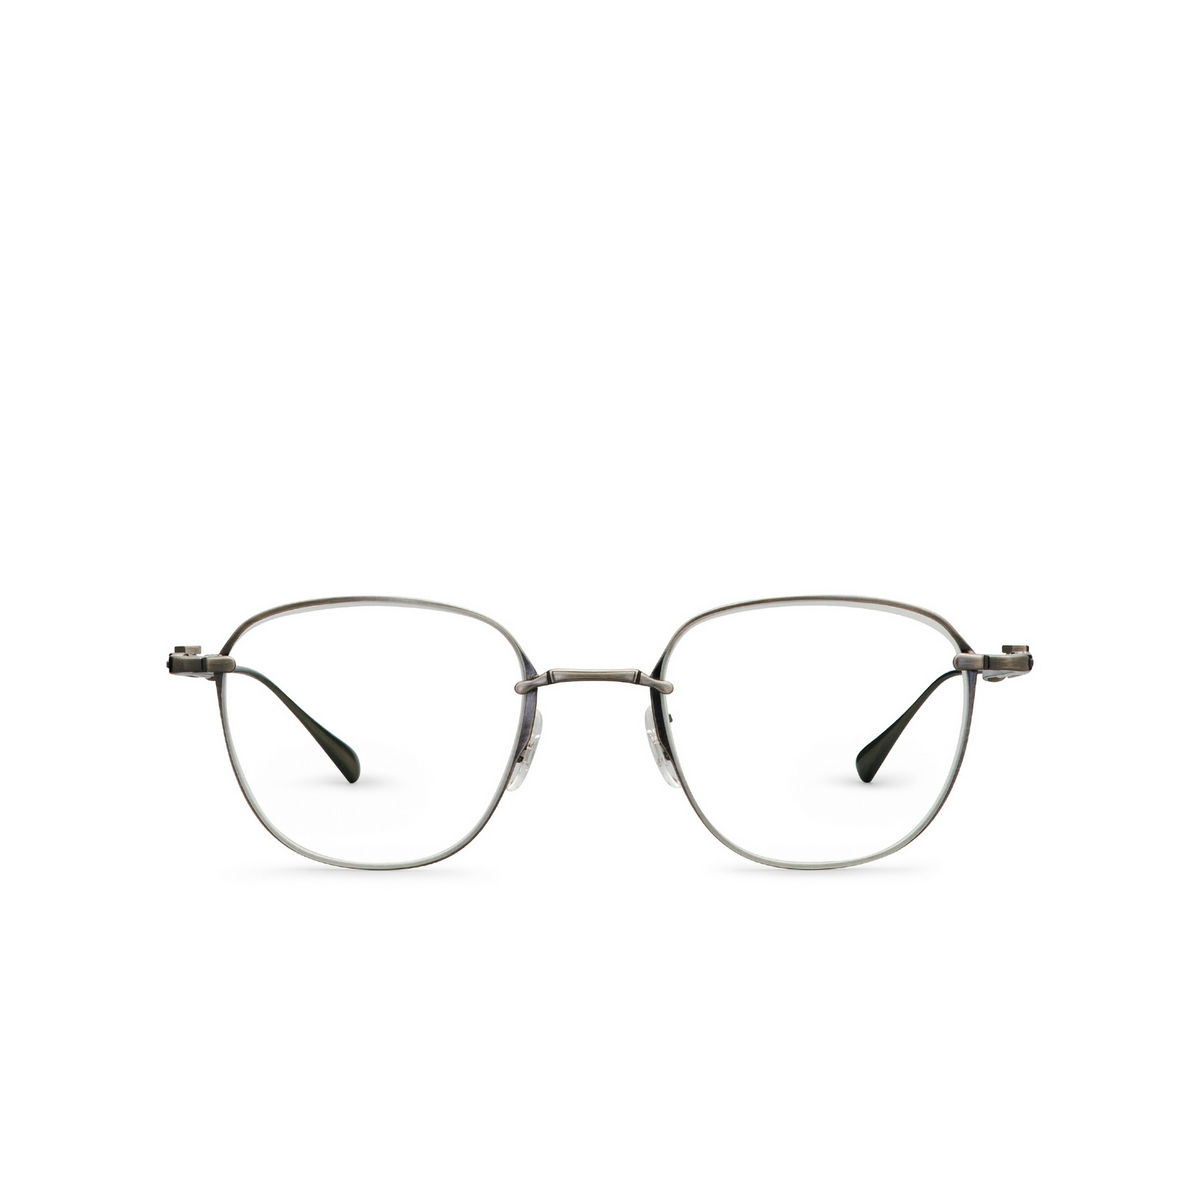 Mr. Leight GRIFFITH CL Eyeglasses PW-GRYSTN Pewter-Greystone - front view